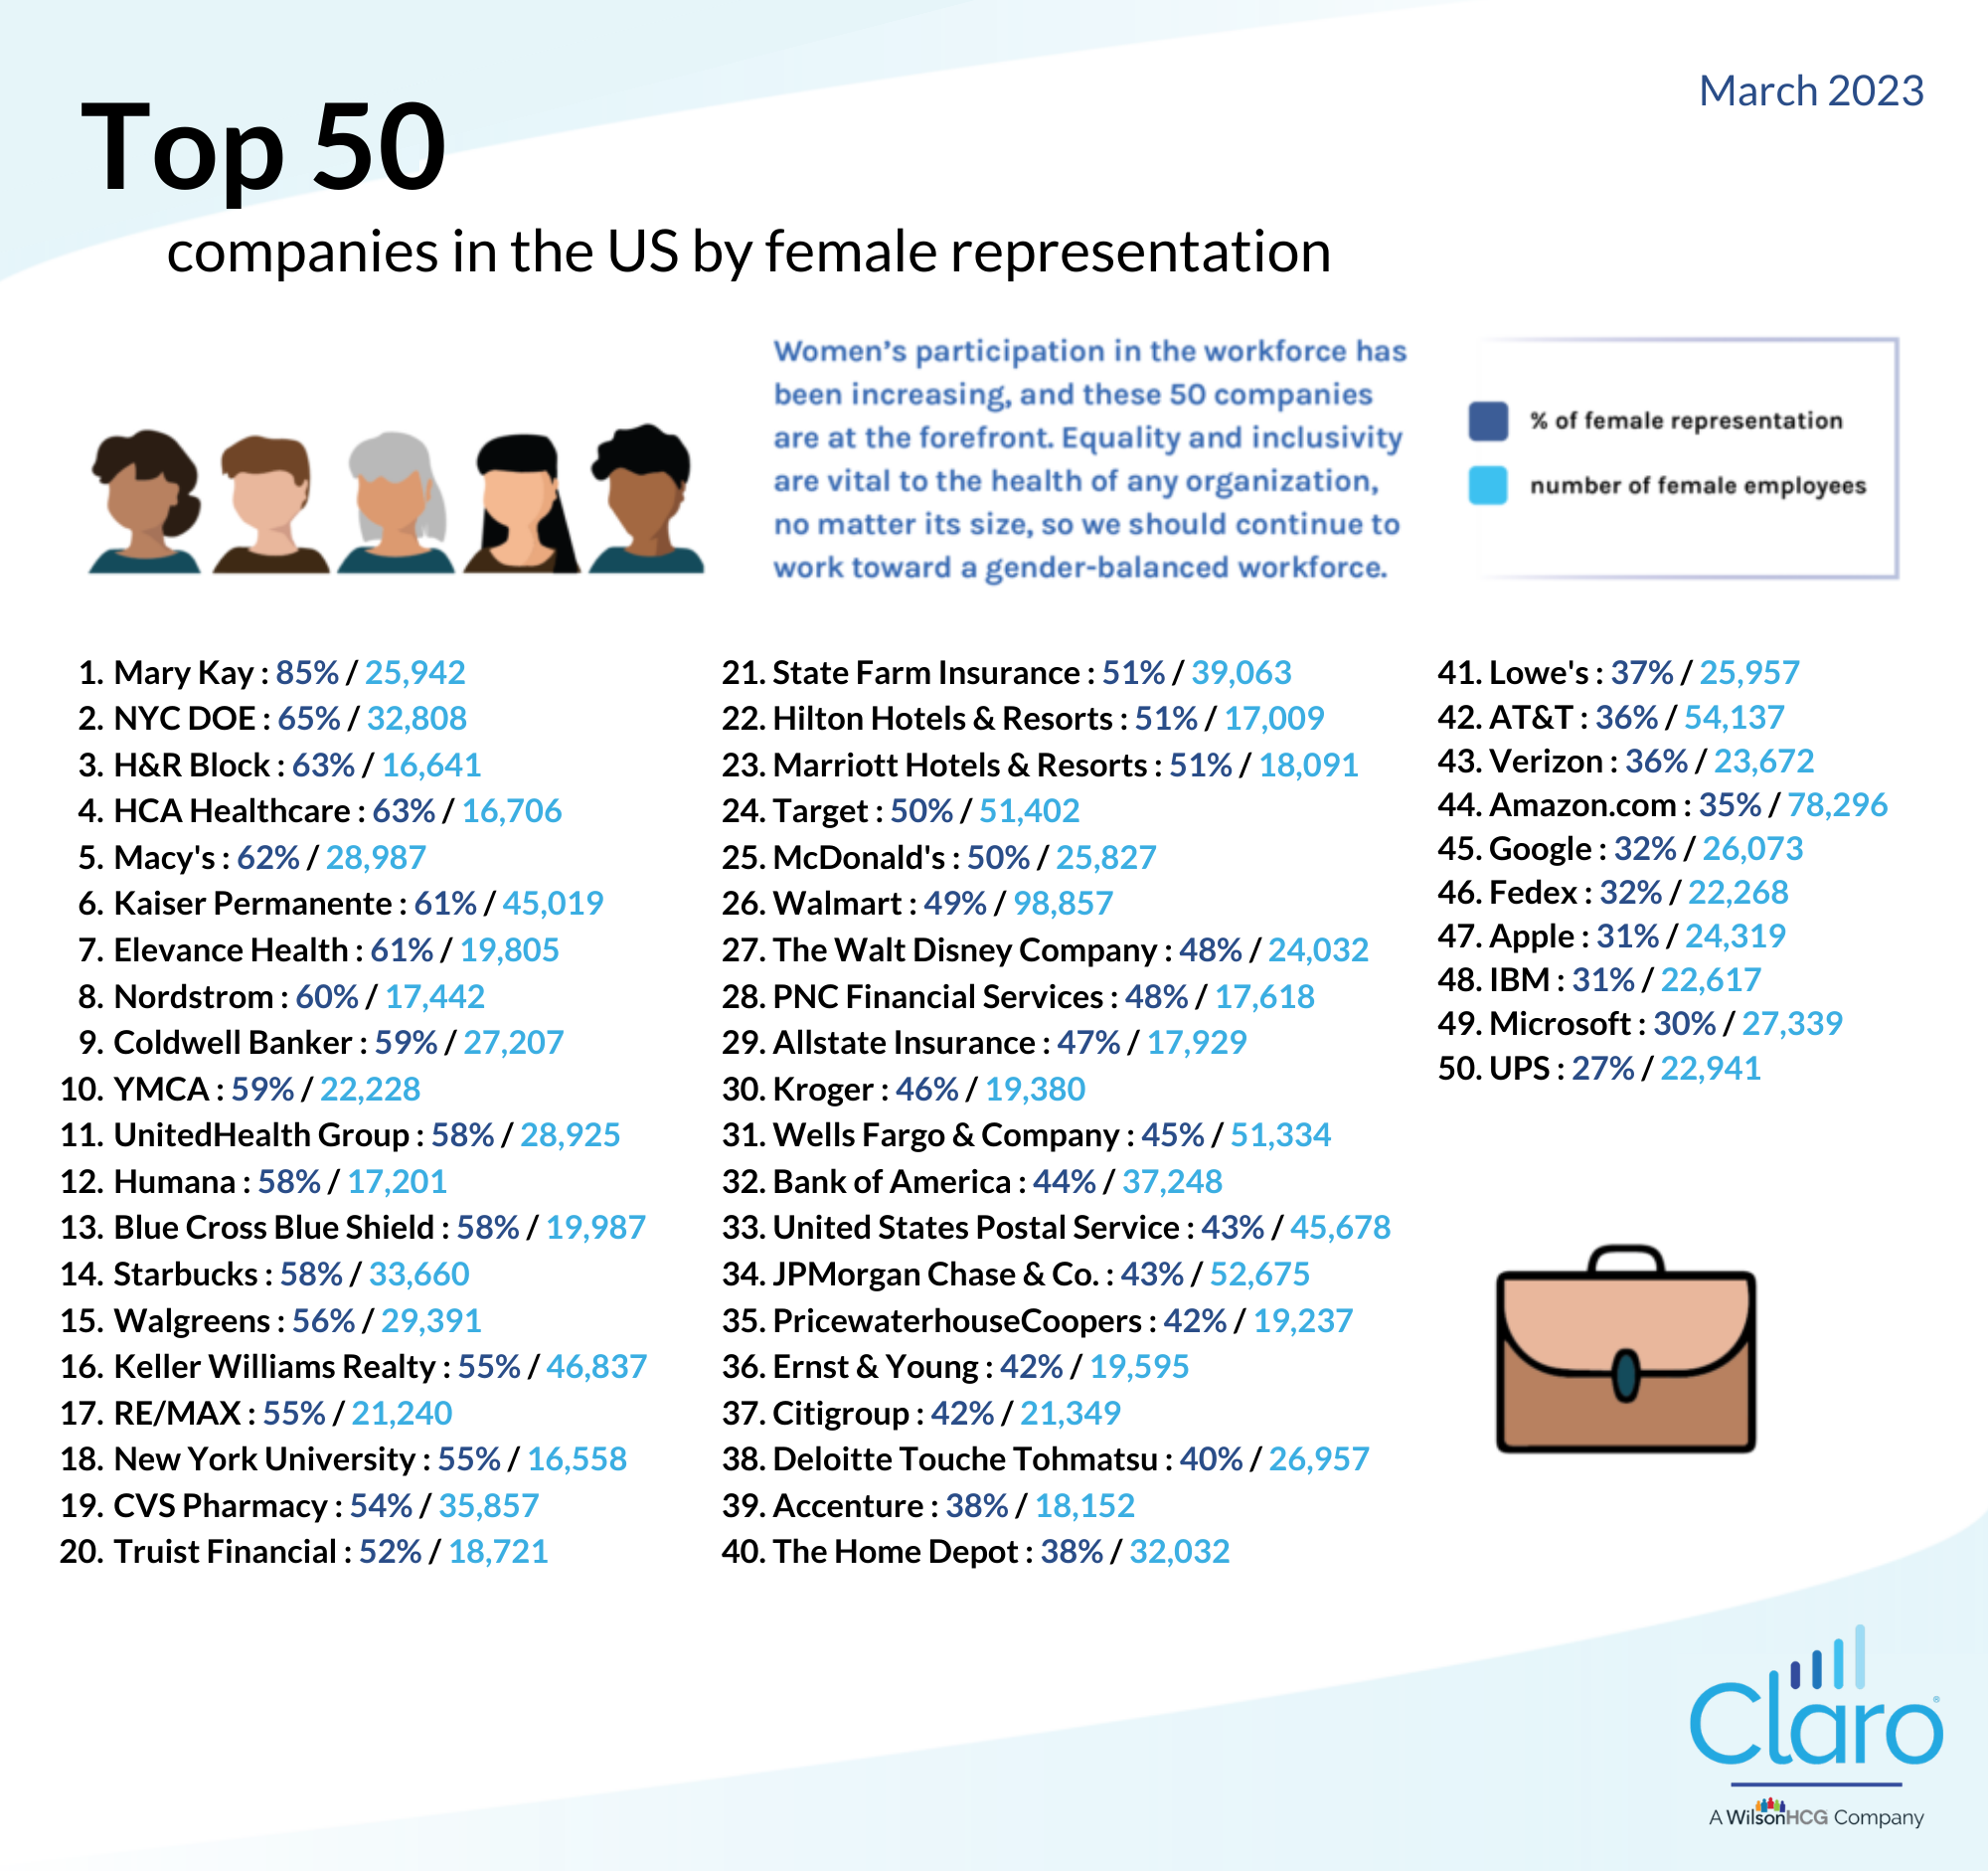 Top 50 employers of women in the US